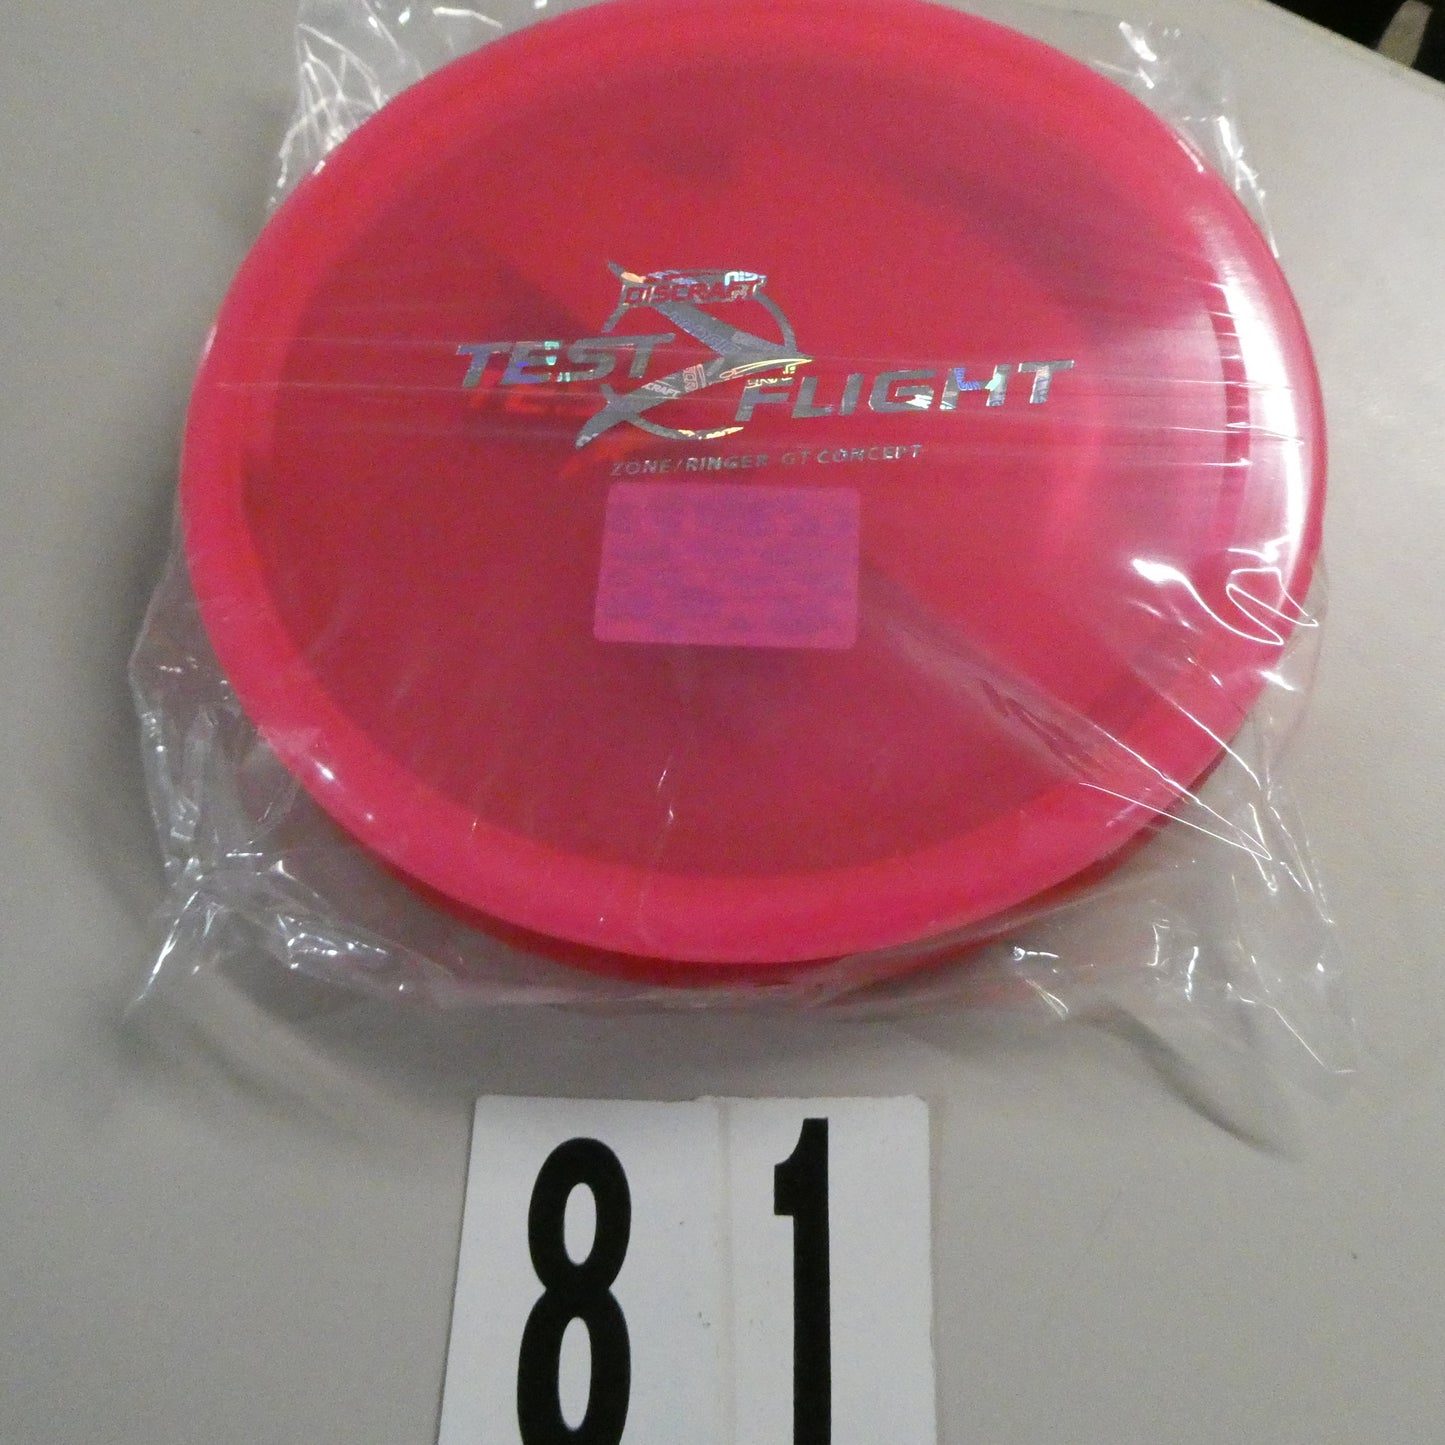 Zone GT- Battle Pack (2 Discs+Sticker) - Pick Your Packs!